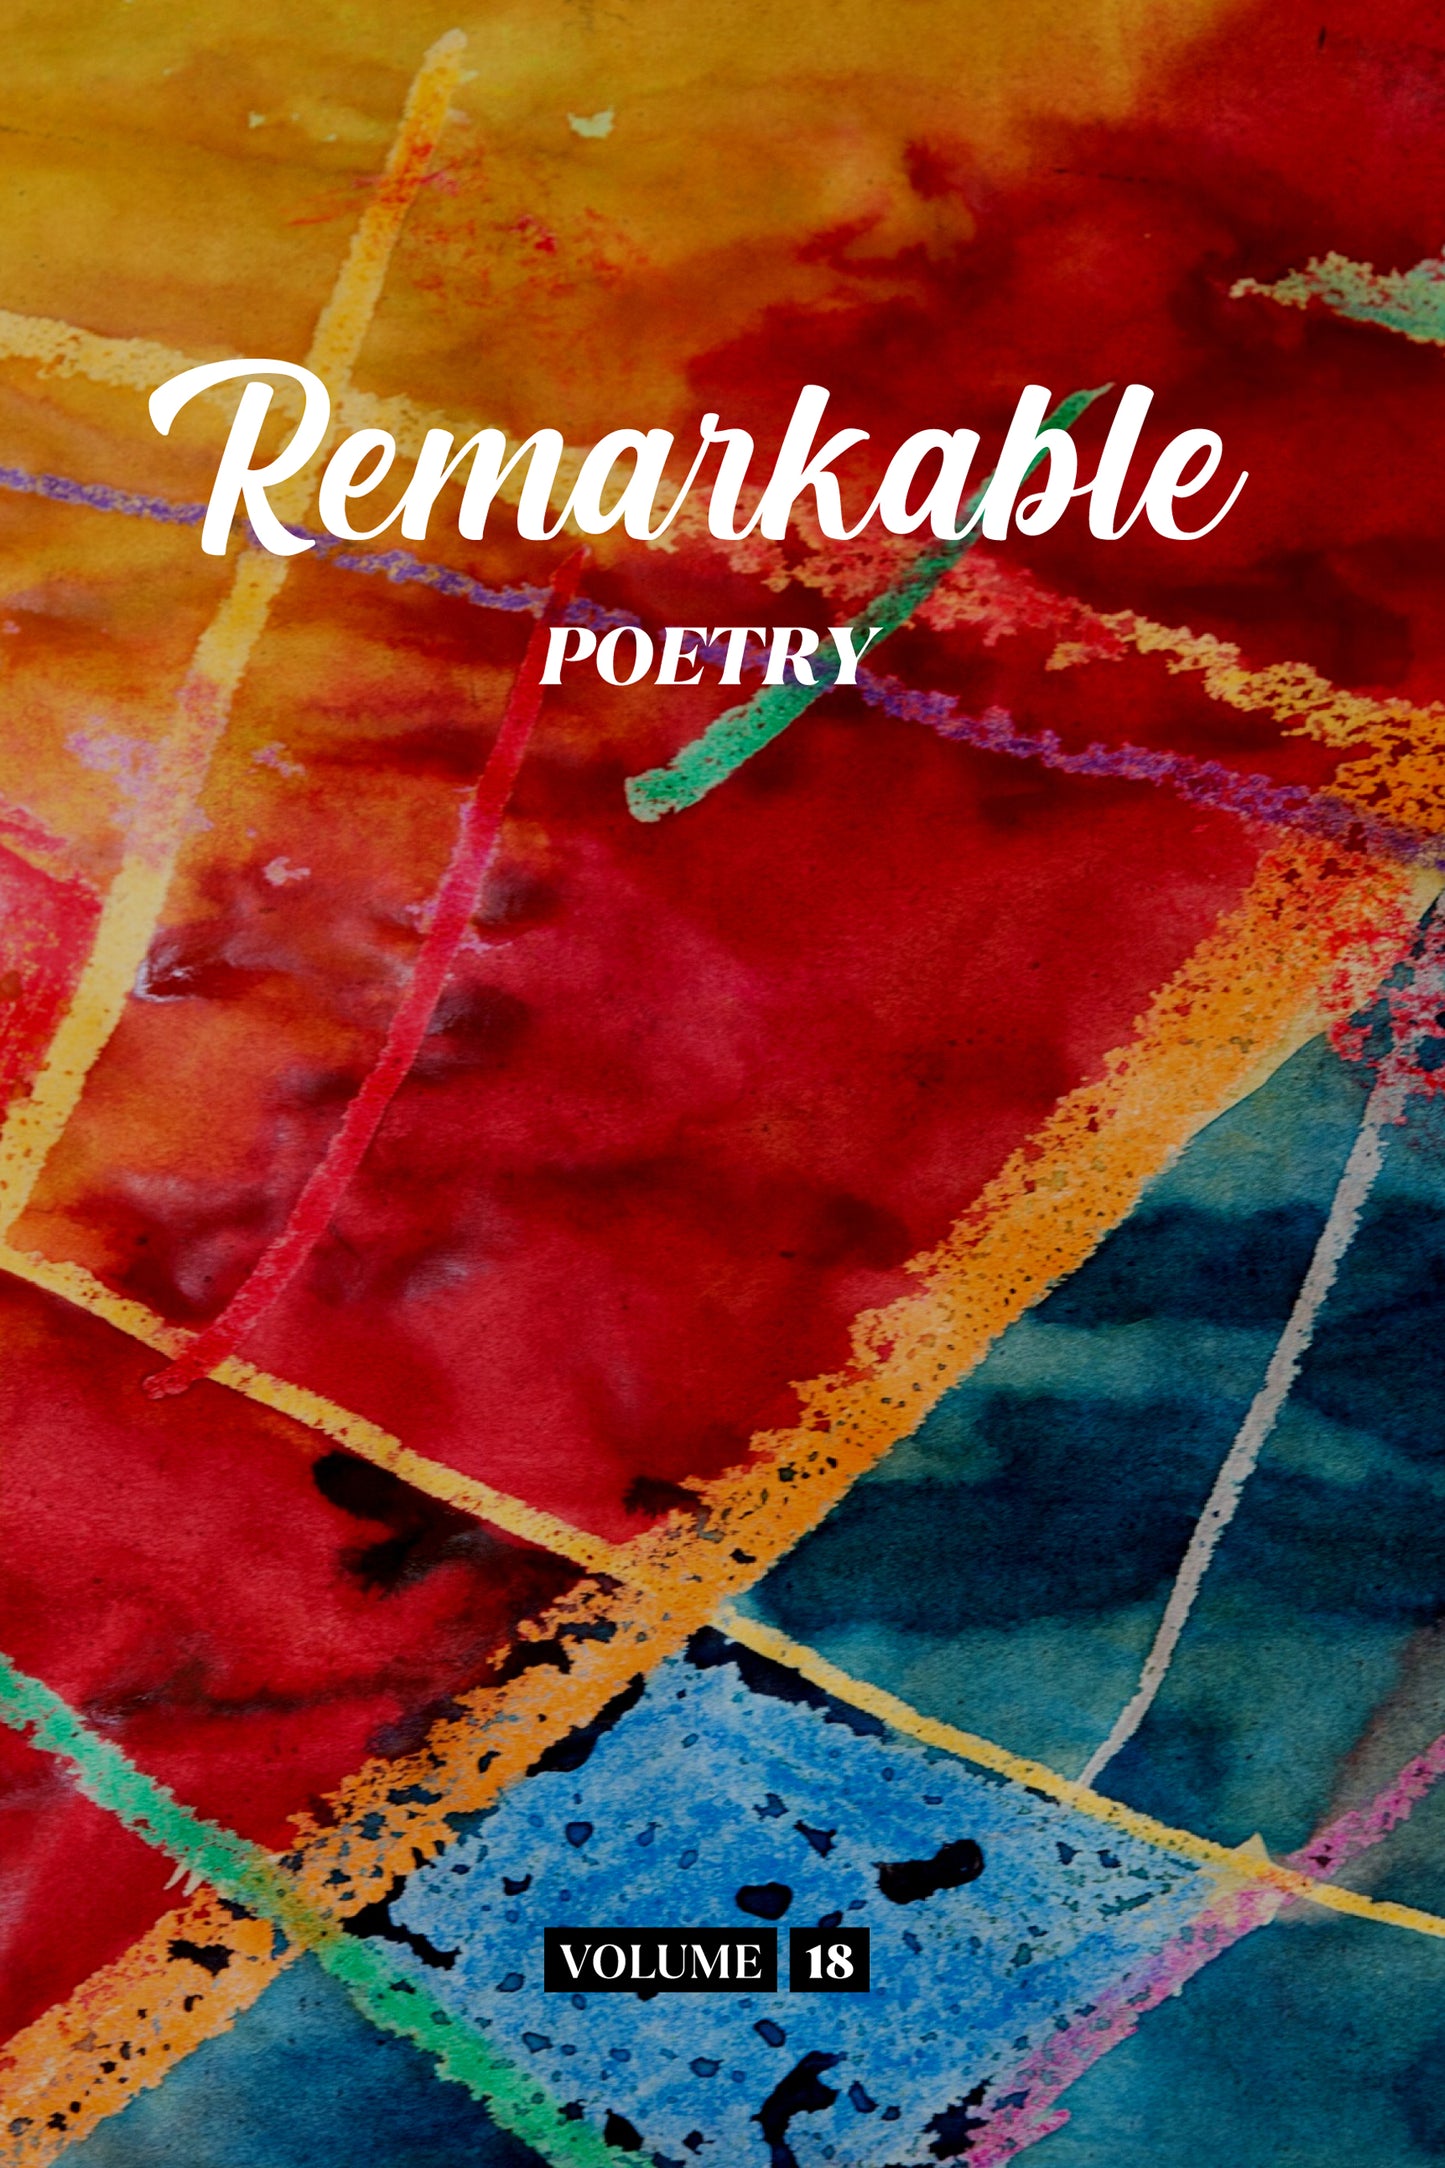 Remarkable Poetry (Volume 18) - Physical Book (Pre-Order)